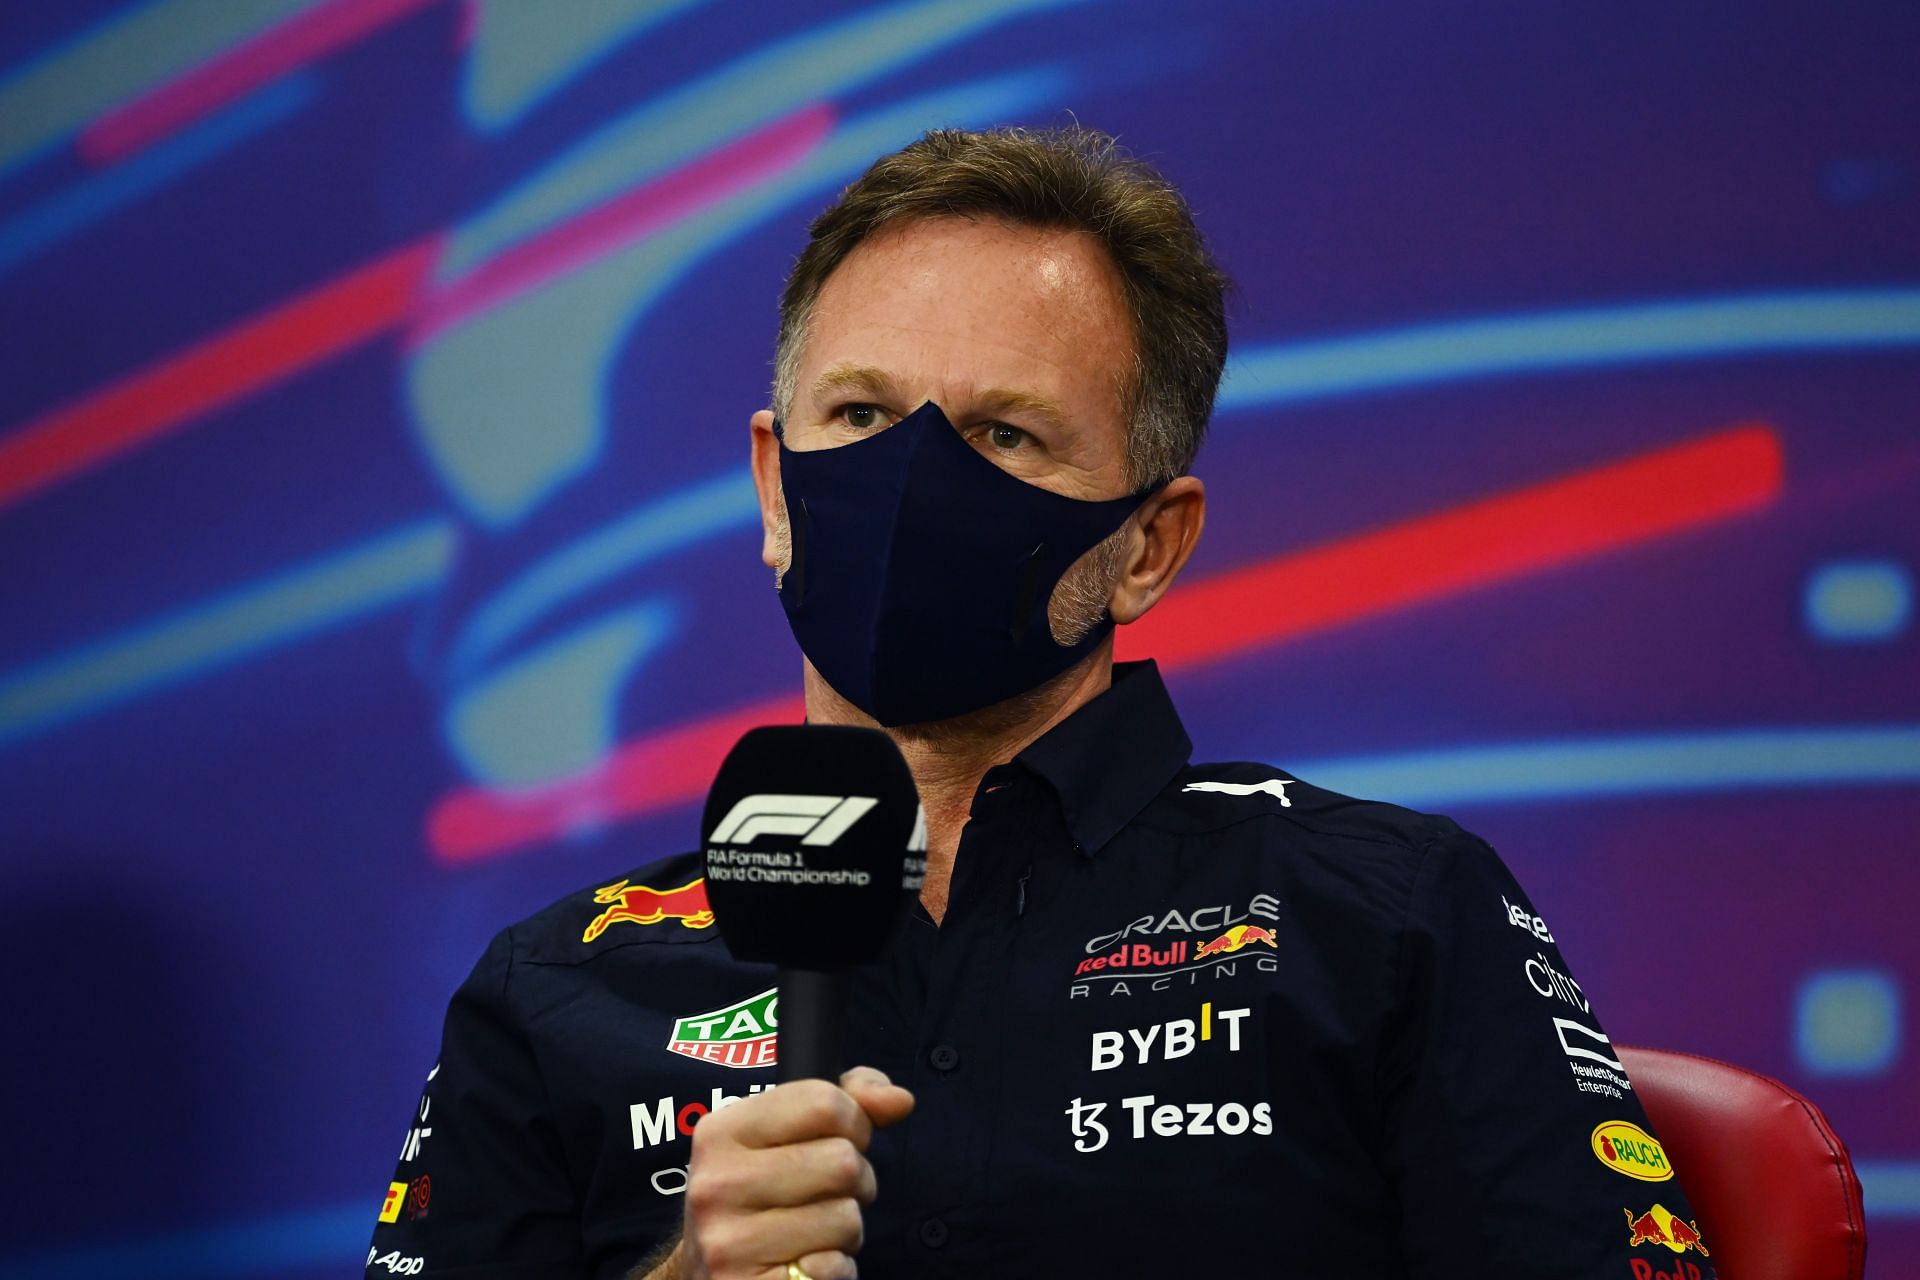 F1 Grand Prix of Bahrain - Final Practice - Christian Horner during a press conference